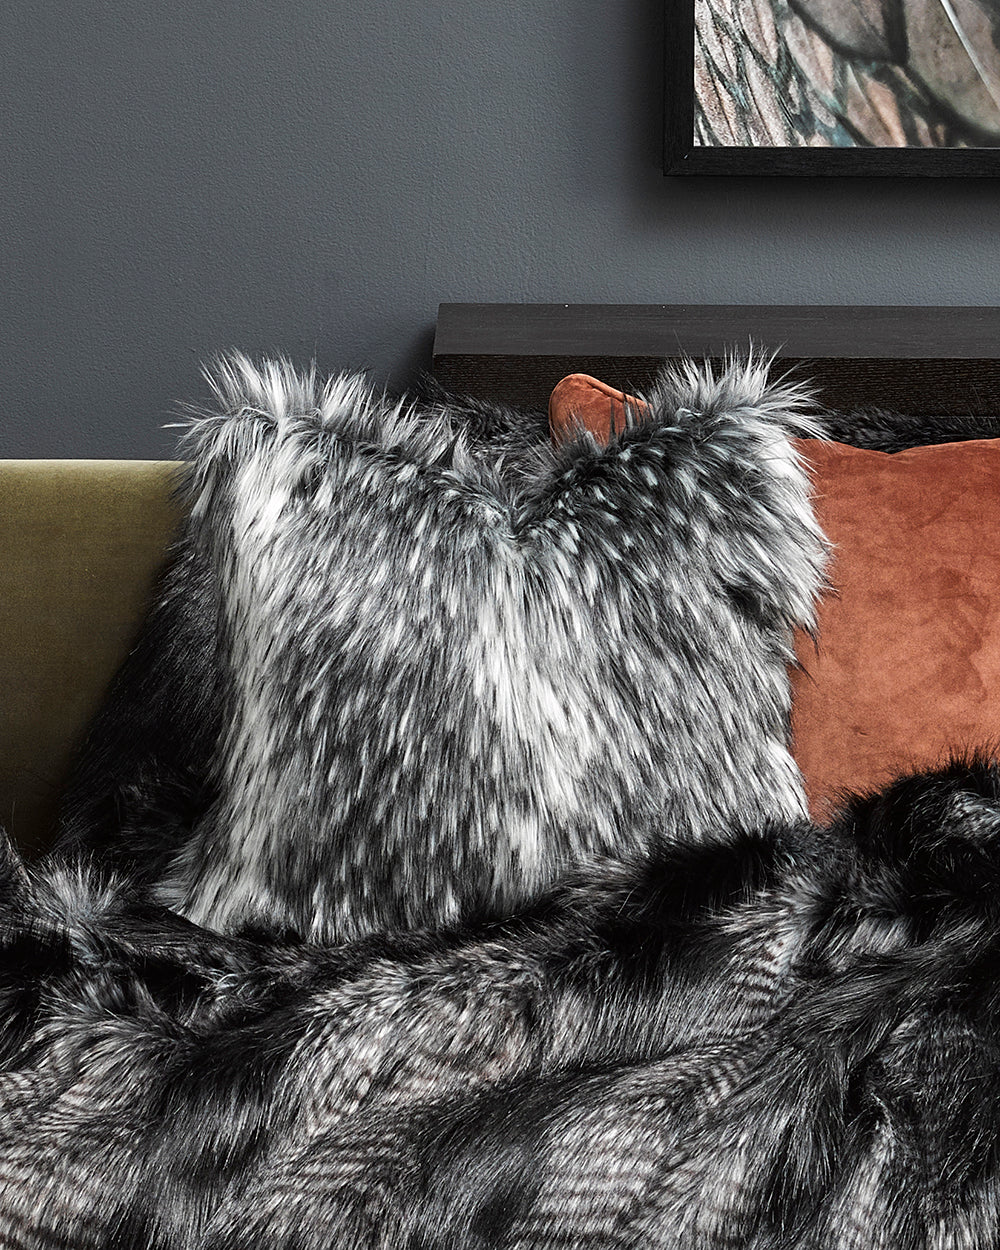 Heirloom Alaskan Wolf Cushions in Faux Fur are available from Make Your House A Home Premium Stockist. Furniture Store Bendigo, Victoria. Australia Wide Delivery. Furtex Baya.